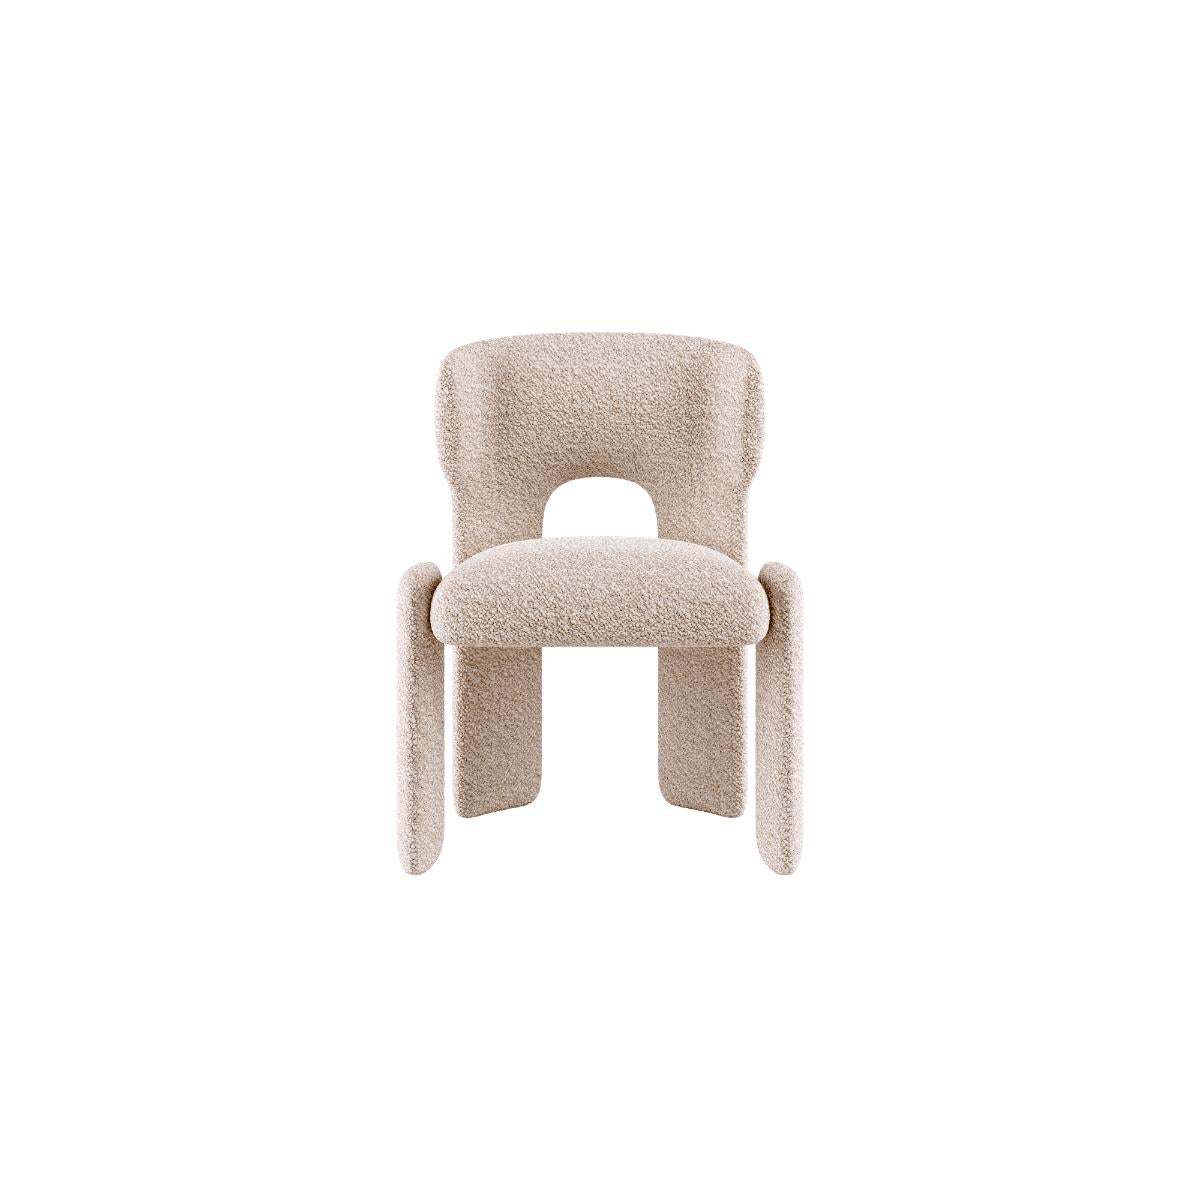 Bold Dining Chair by Mohdern
Dimensions: W 61 x D 54 x H 79 cm
Materials: Fabric, Bouclé

Bold is a refined furniture collection designed and produced by the Mohdern brand. The series includes the armchair and lounge chair; the sofa in different